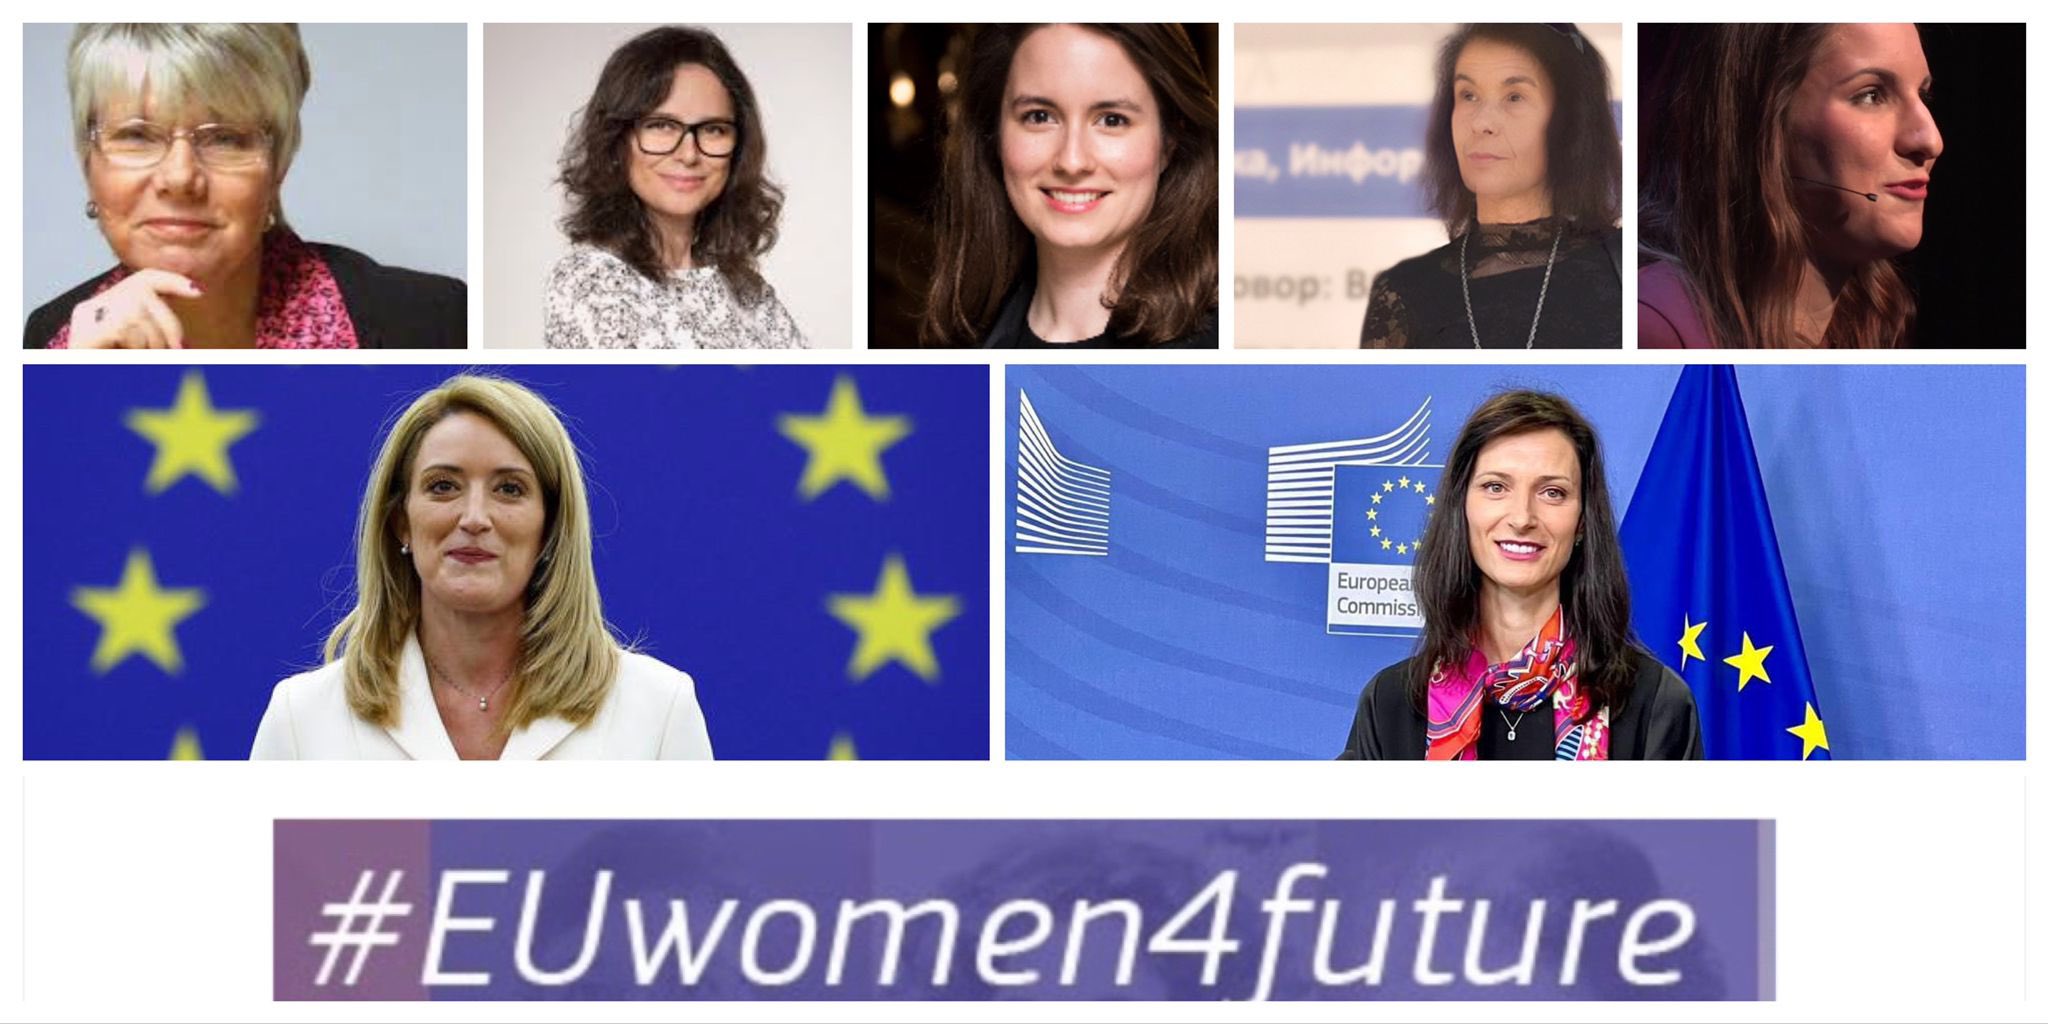 INTERNATIONAL WOMEN’S DAY – #EUWOMEN4FUTURE ONLINE ROUNDTABLE DISCUSSION